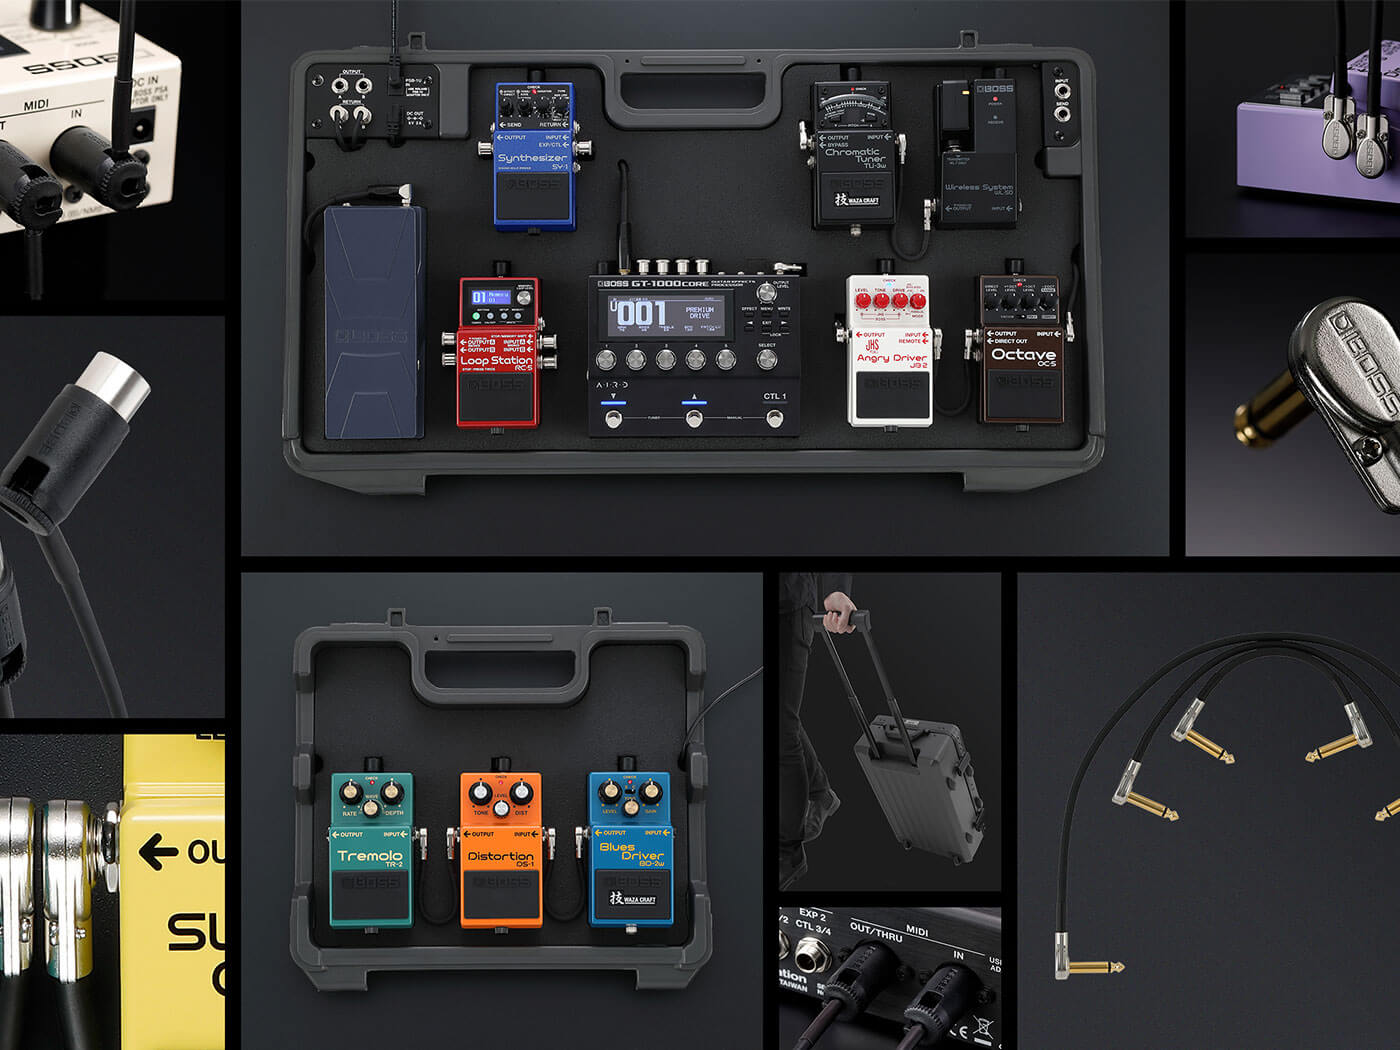 Boss' new pedalboard and pedalboard accessories